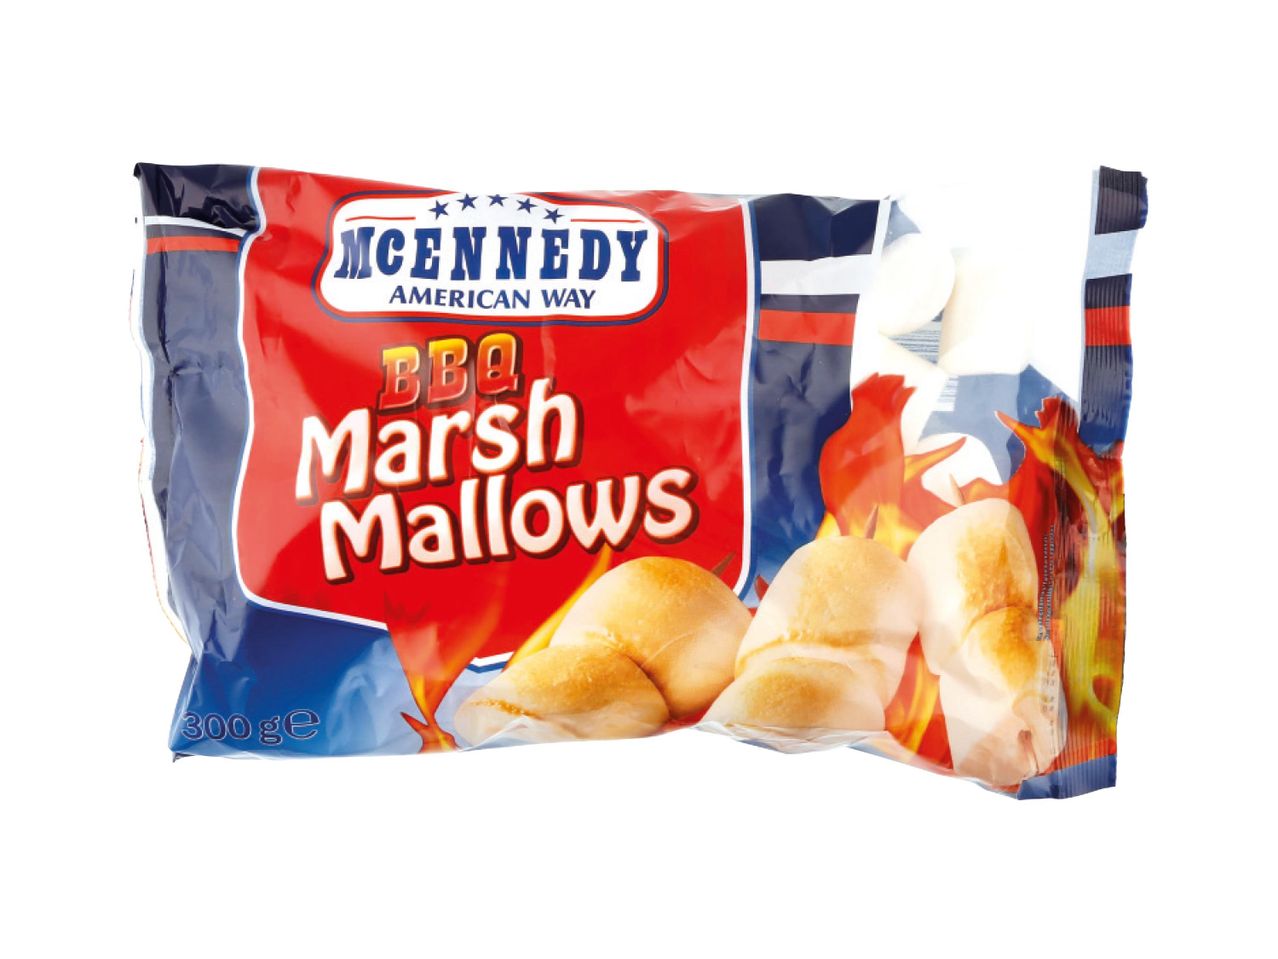 Go to full screen view: BBQ Marshmallows - Image 1